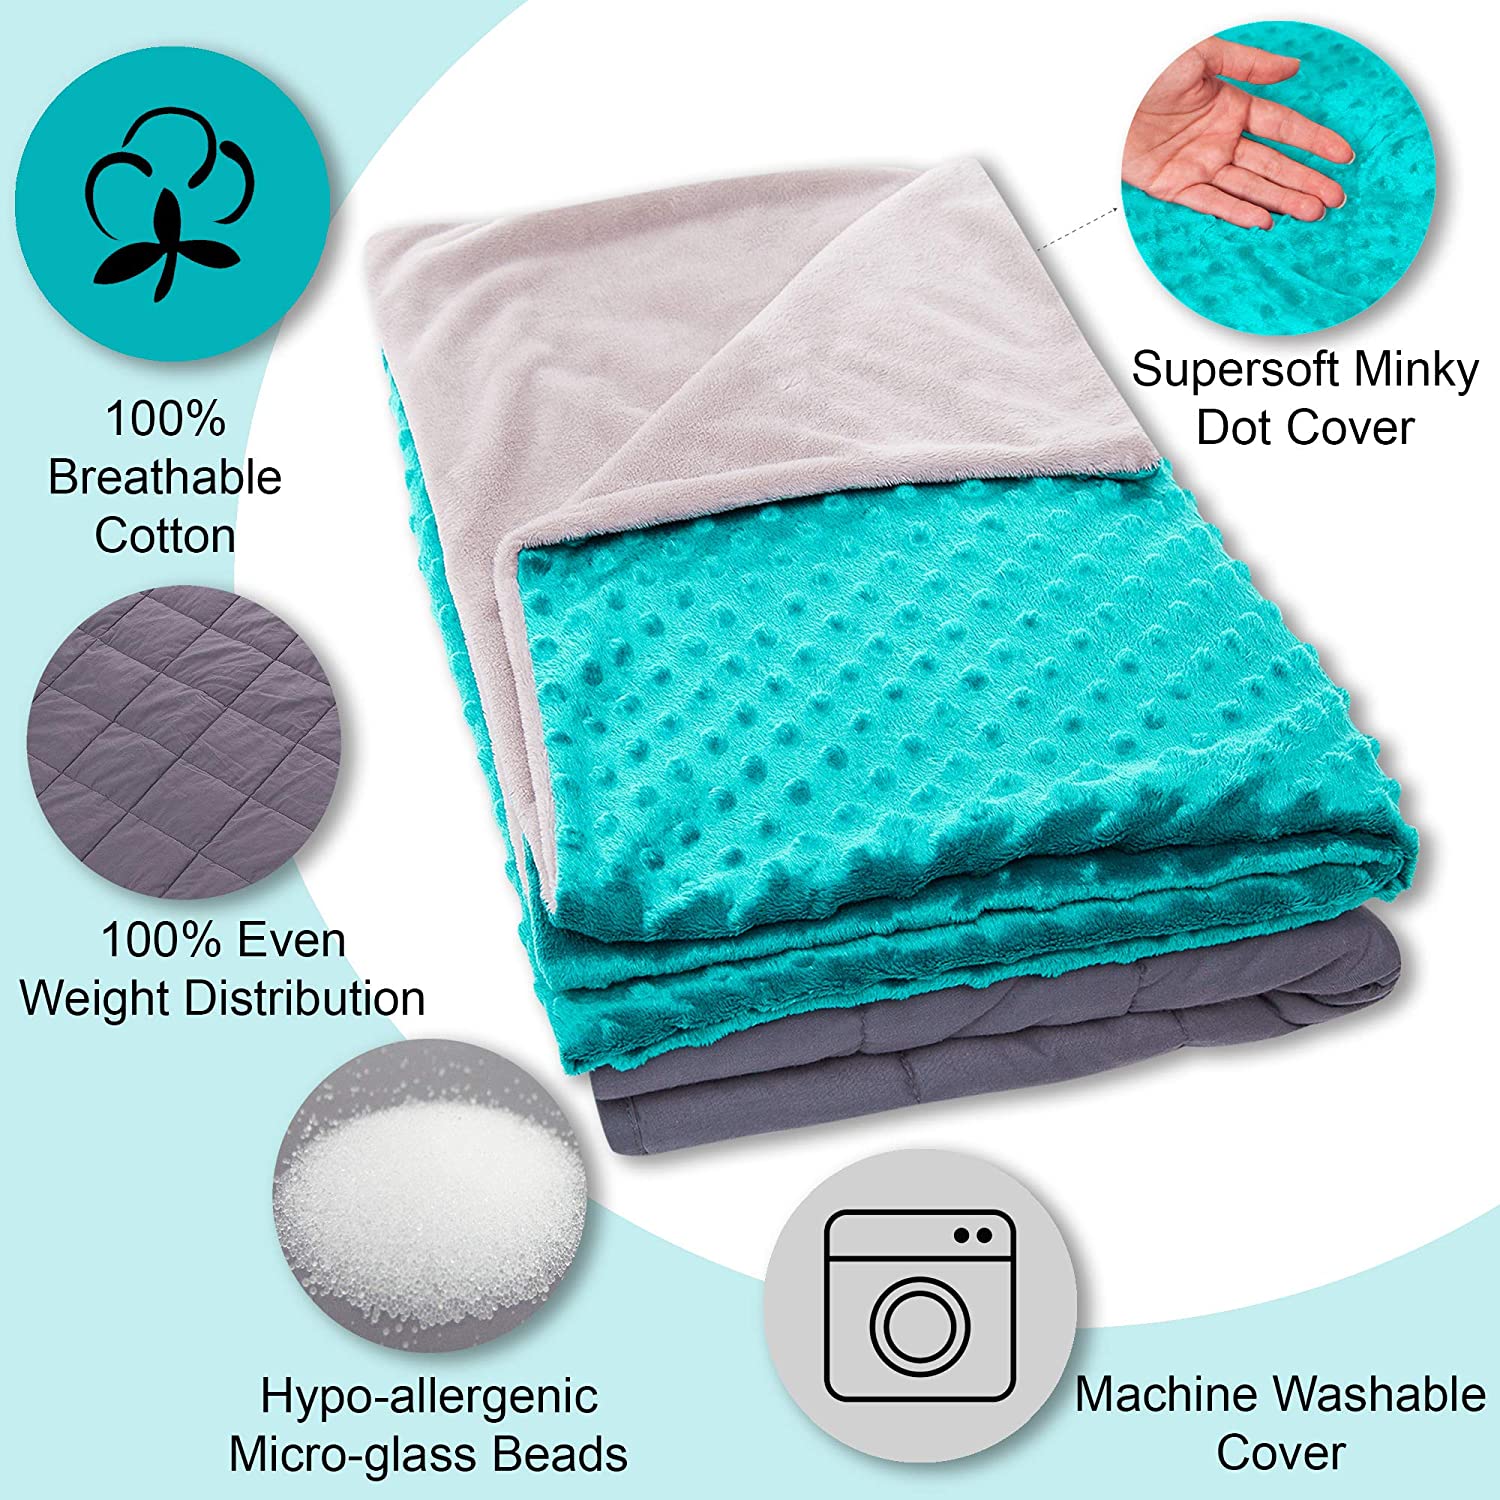 Super Soft 5 Lbs Weighted Blanket for Kids with Removable Cover - 36" x 48" Children Heavy Blanket for Girls and Boys Between 40-60 lbs - Kids Weighted Blankets - Hazli Collection 